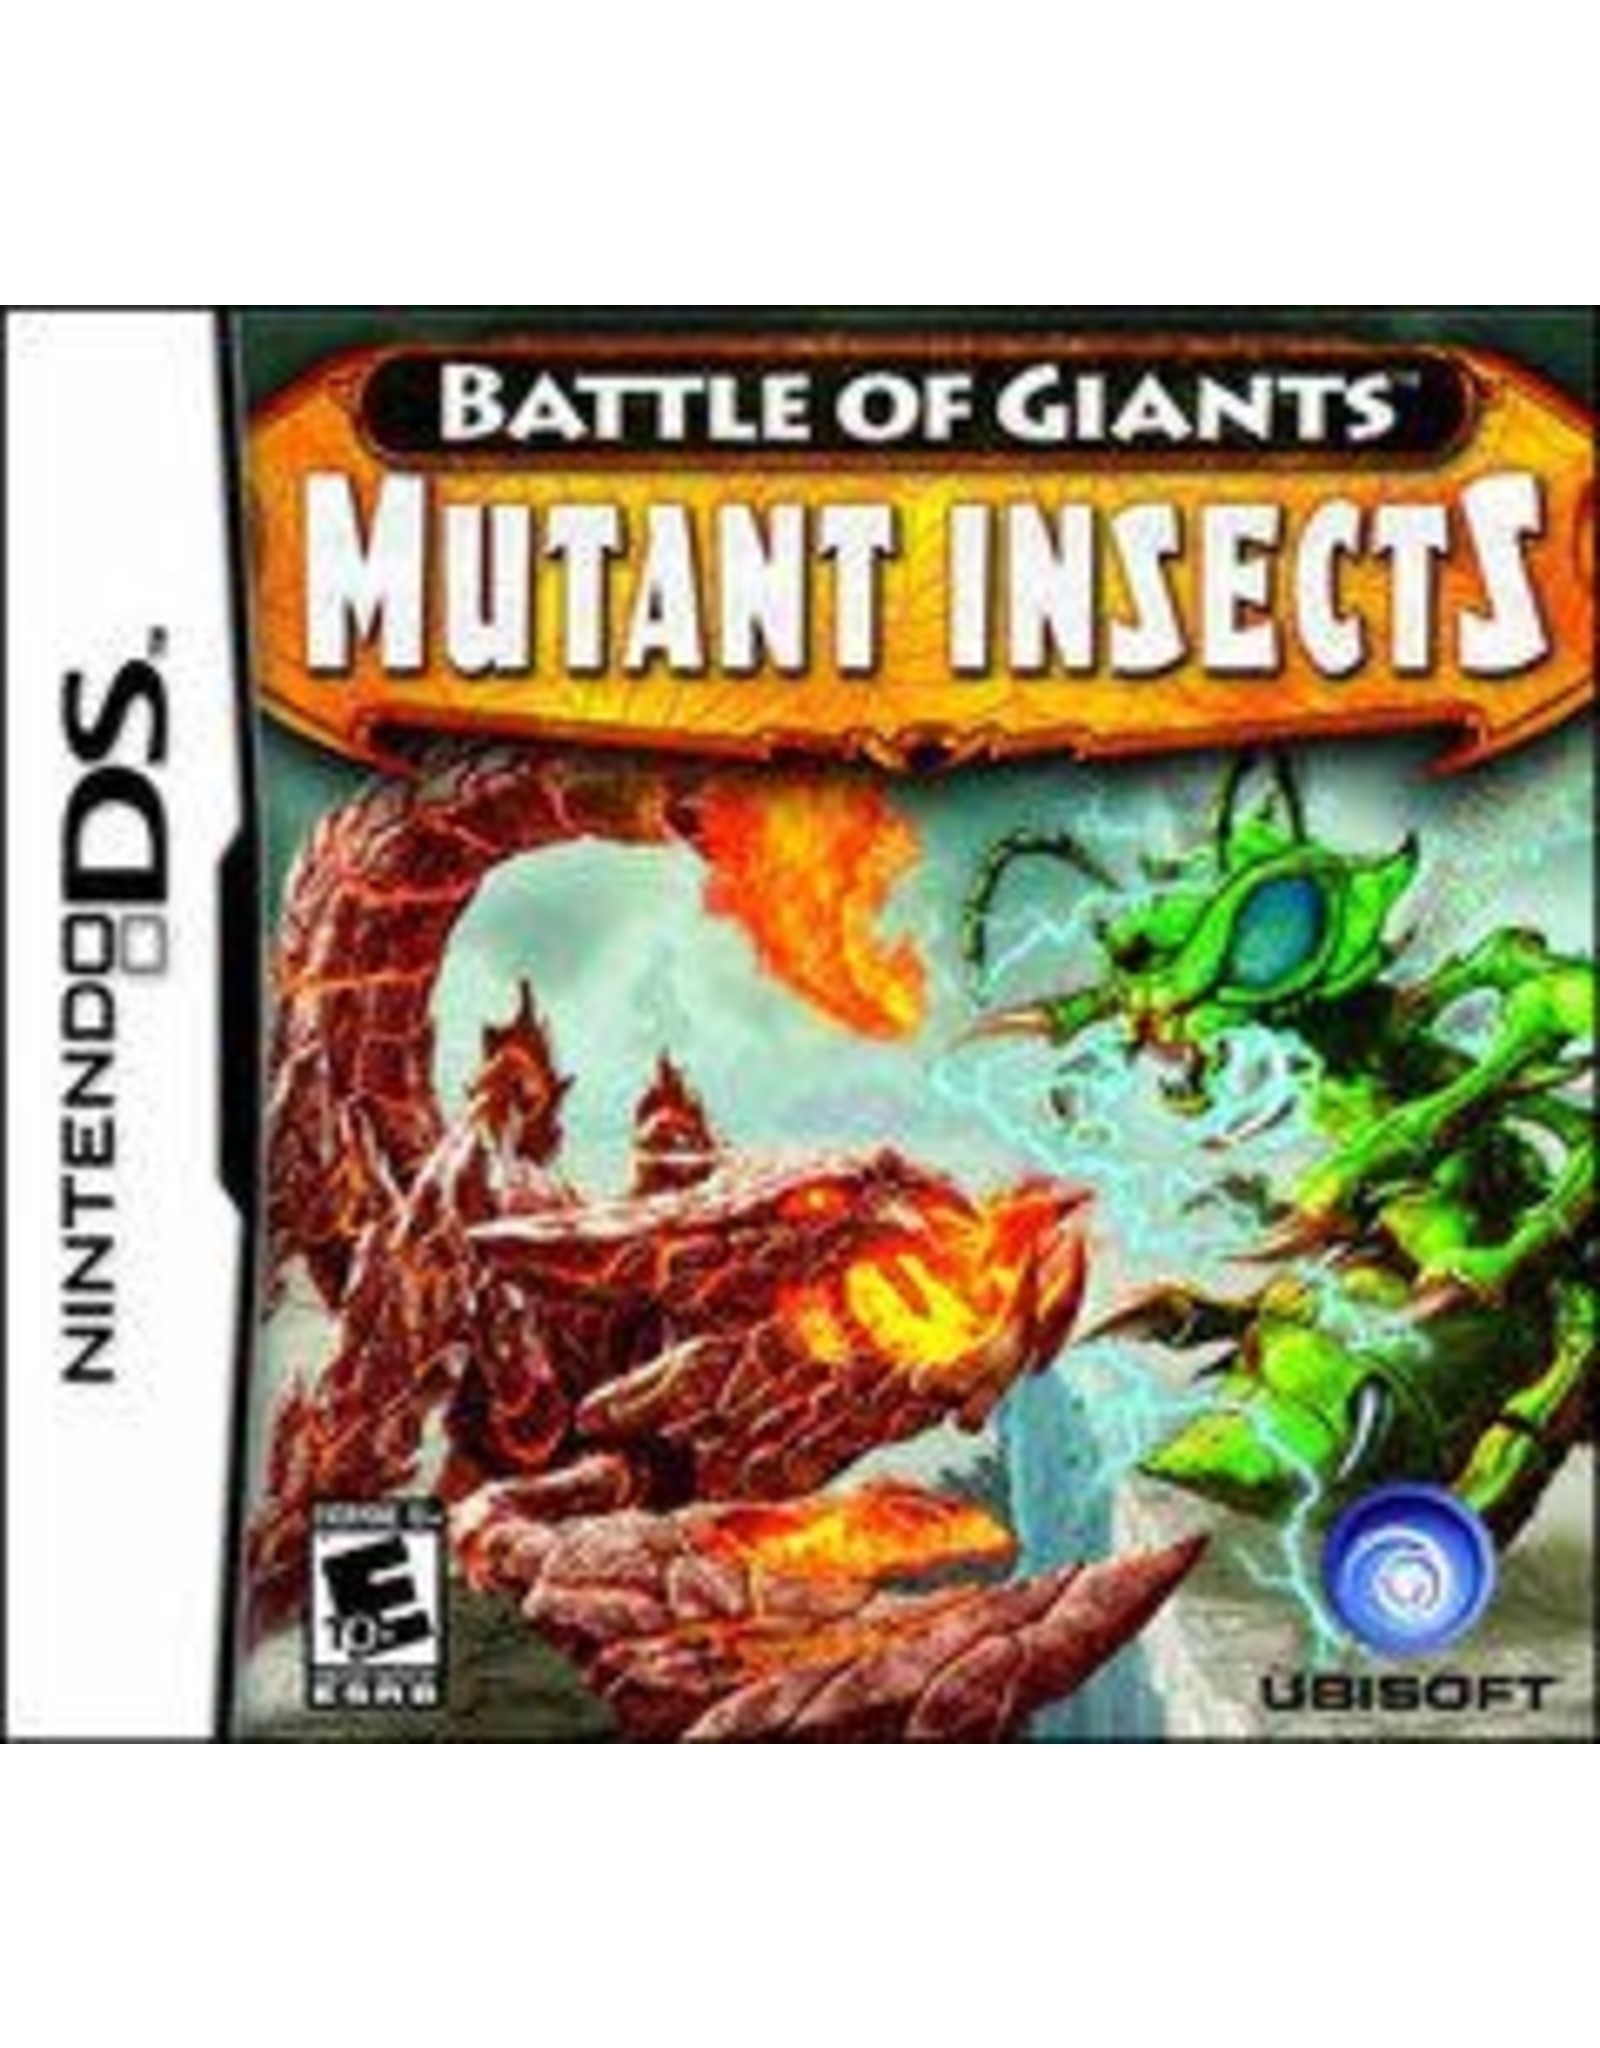 Nintendo DS Battle of Giants: Mutant Insects (CiB)